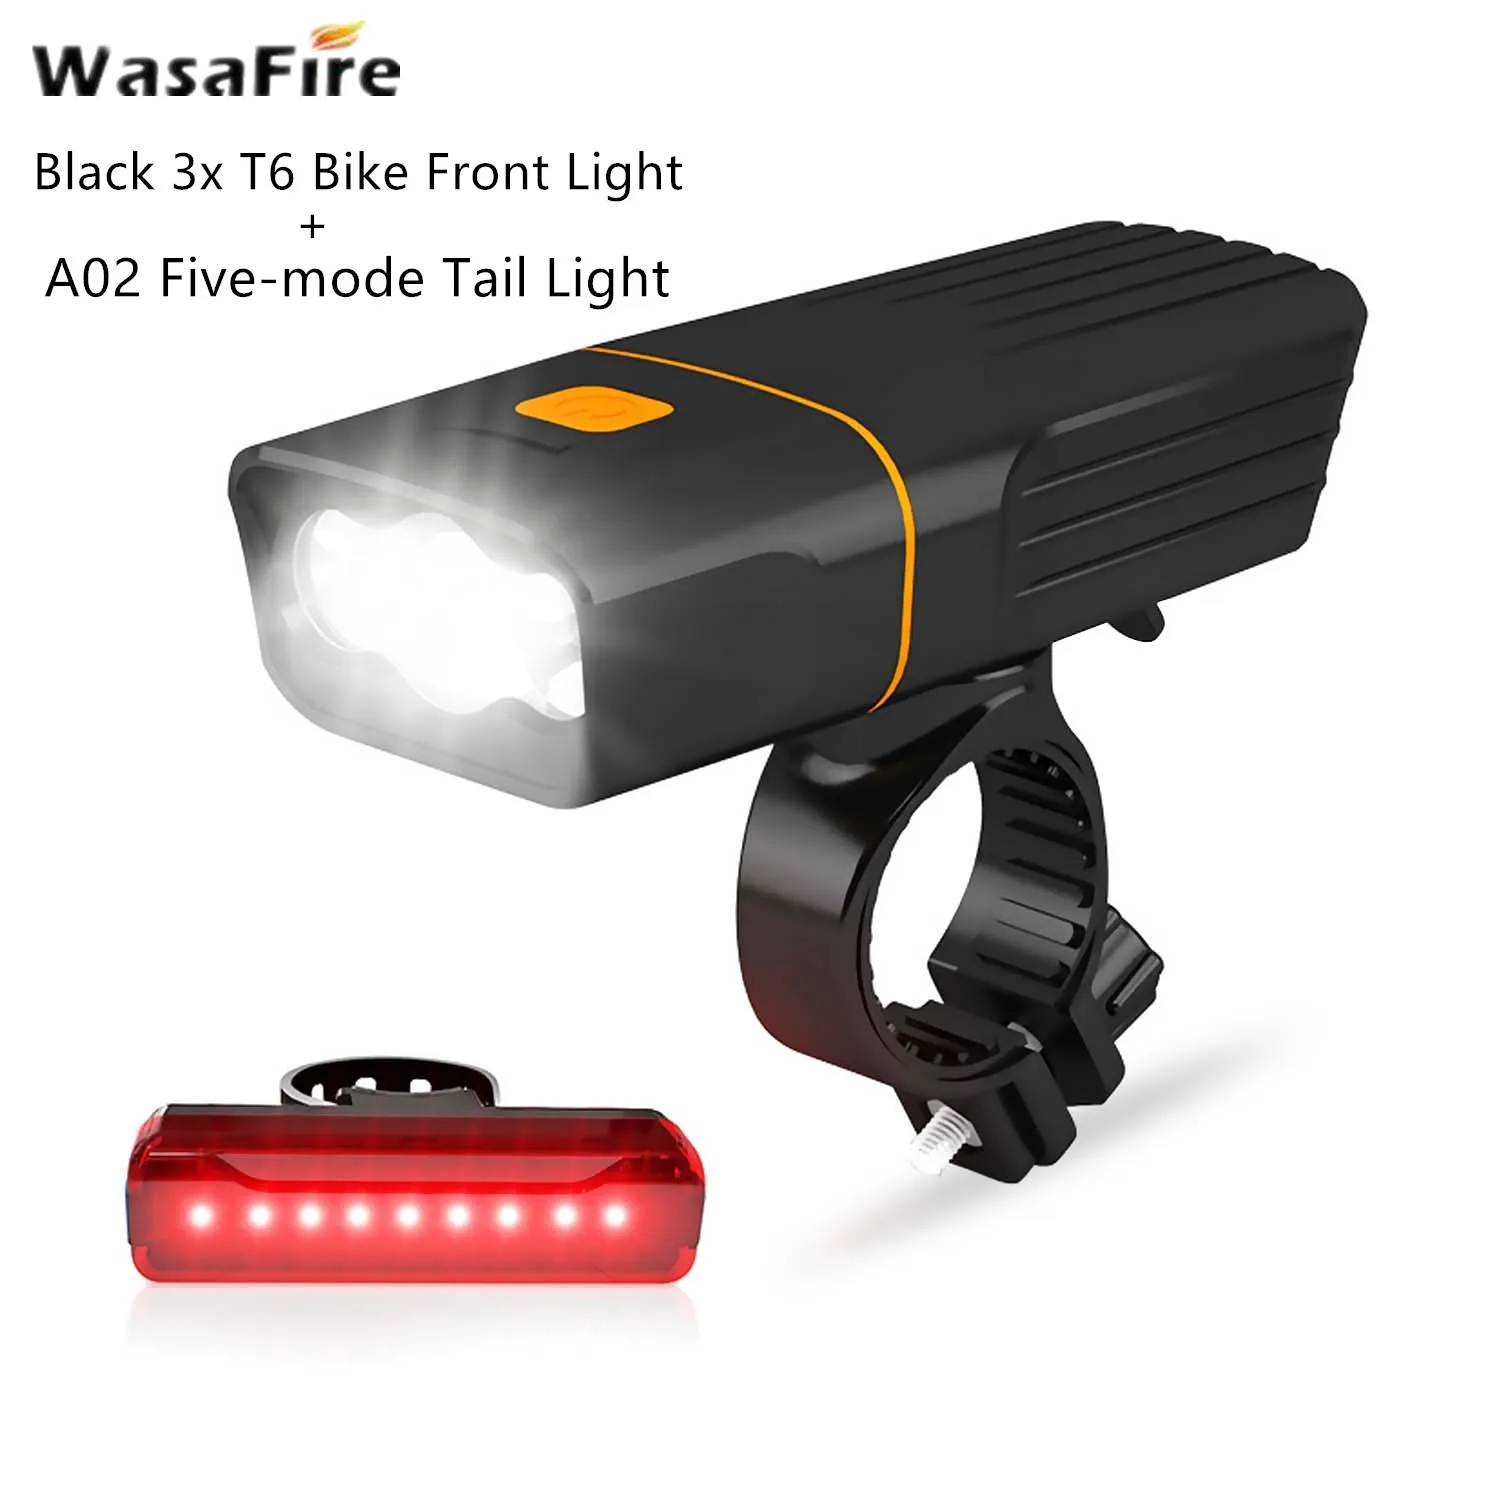 

15000lm 3x L2/T6 Bike Front Rear Light USB Rechargeable Bicycle Headlamp Built-In 5200mAh Battery Cycling Headlight andTaillight